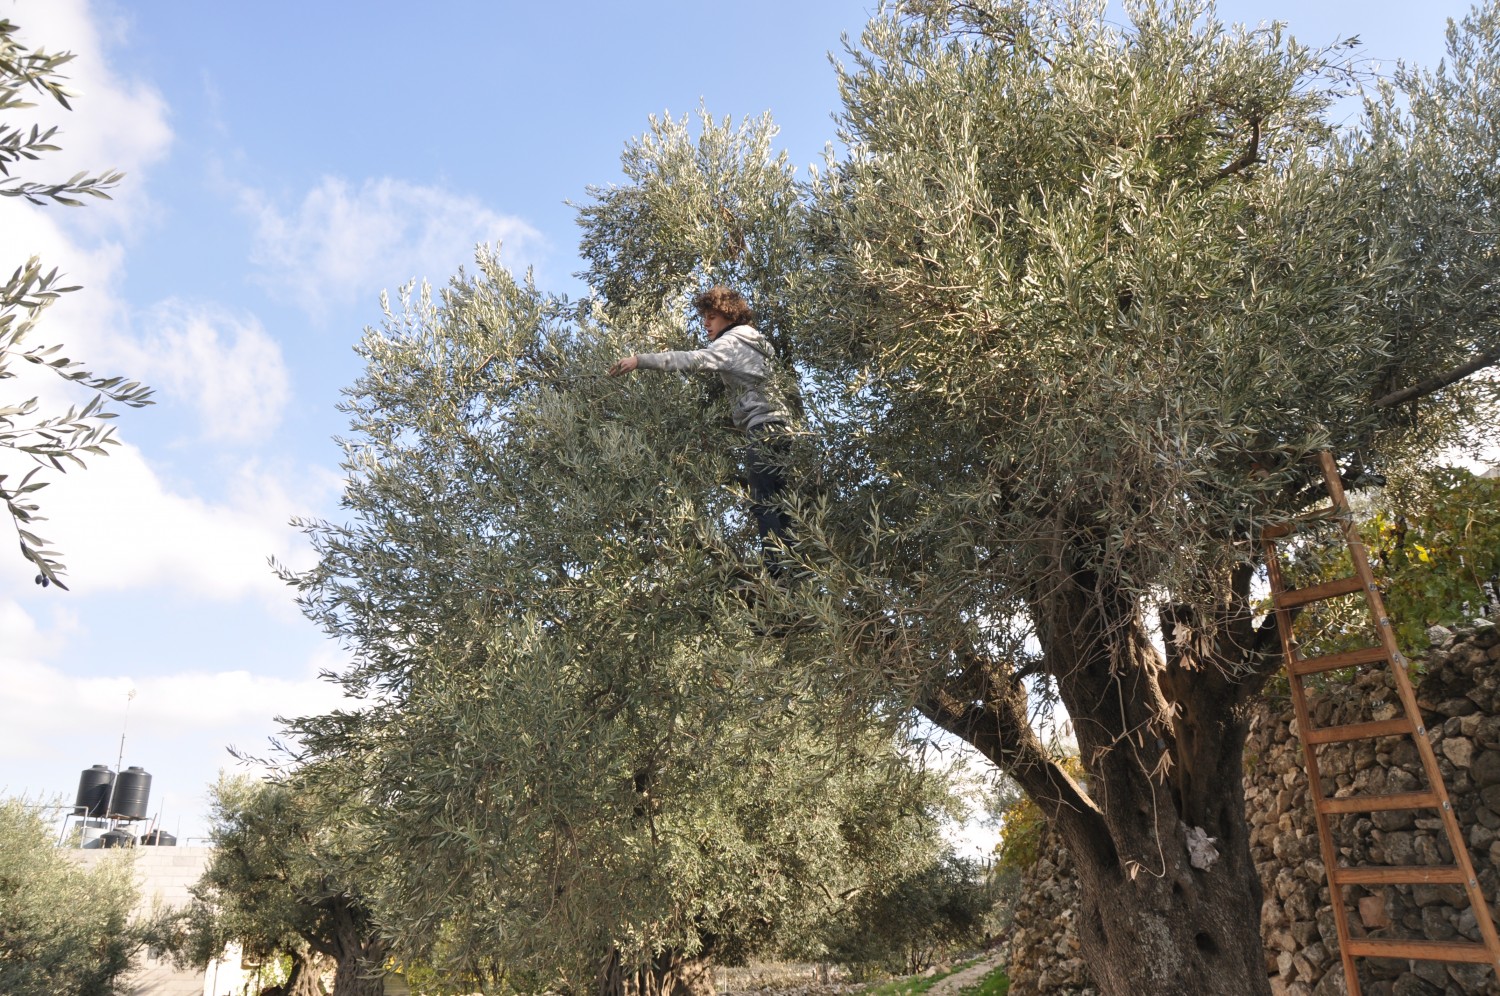 Tomas happily picking olives for Idris